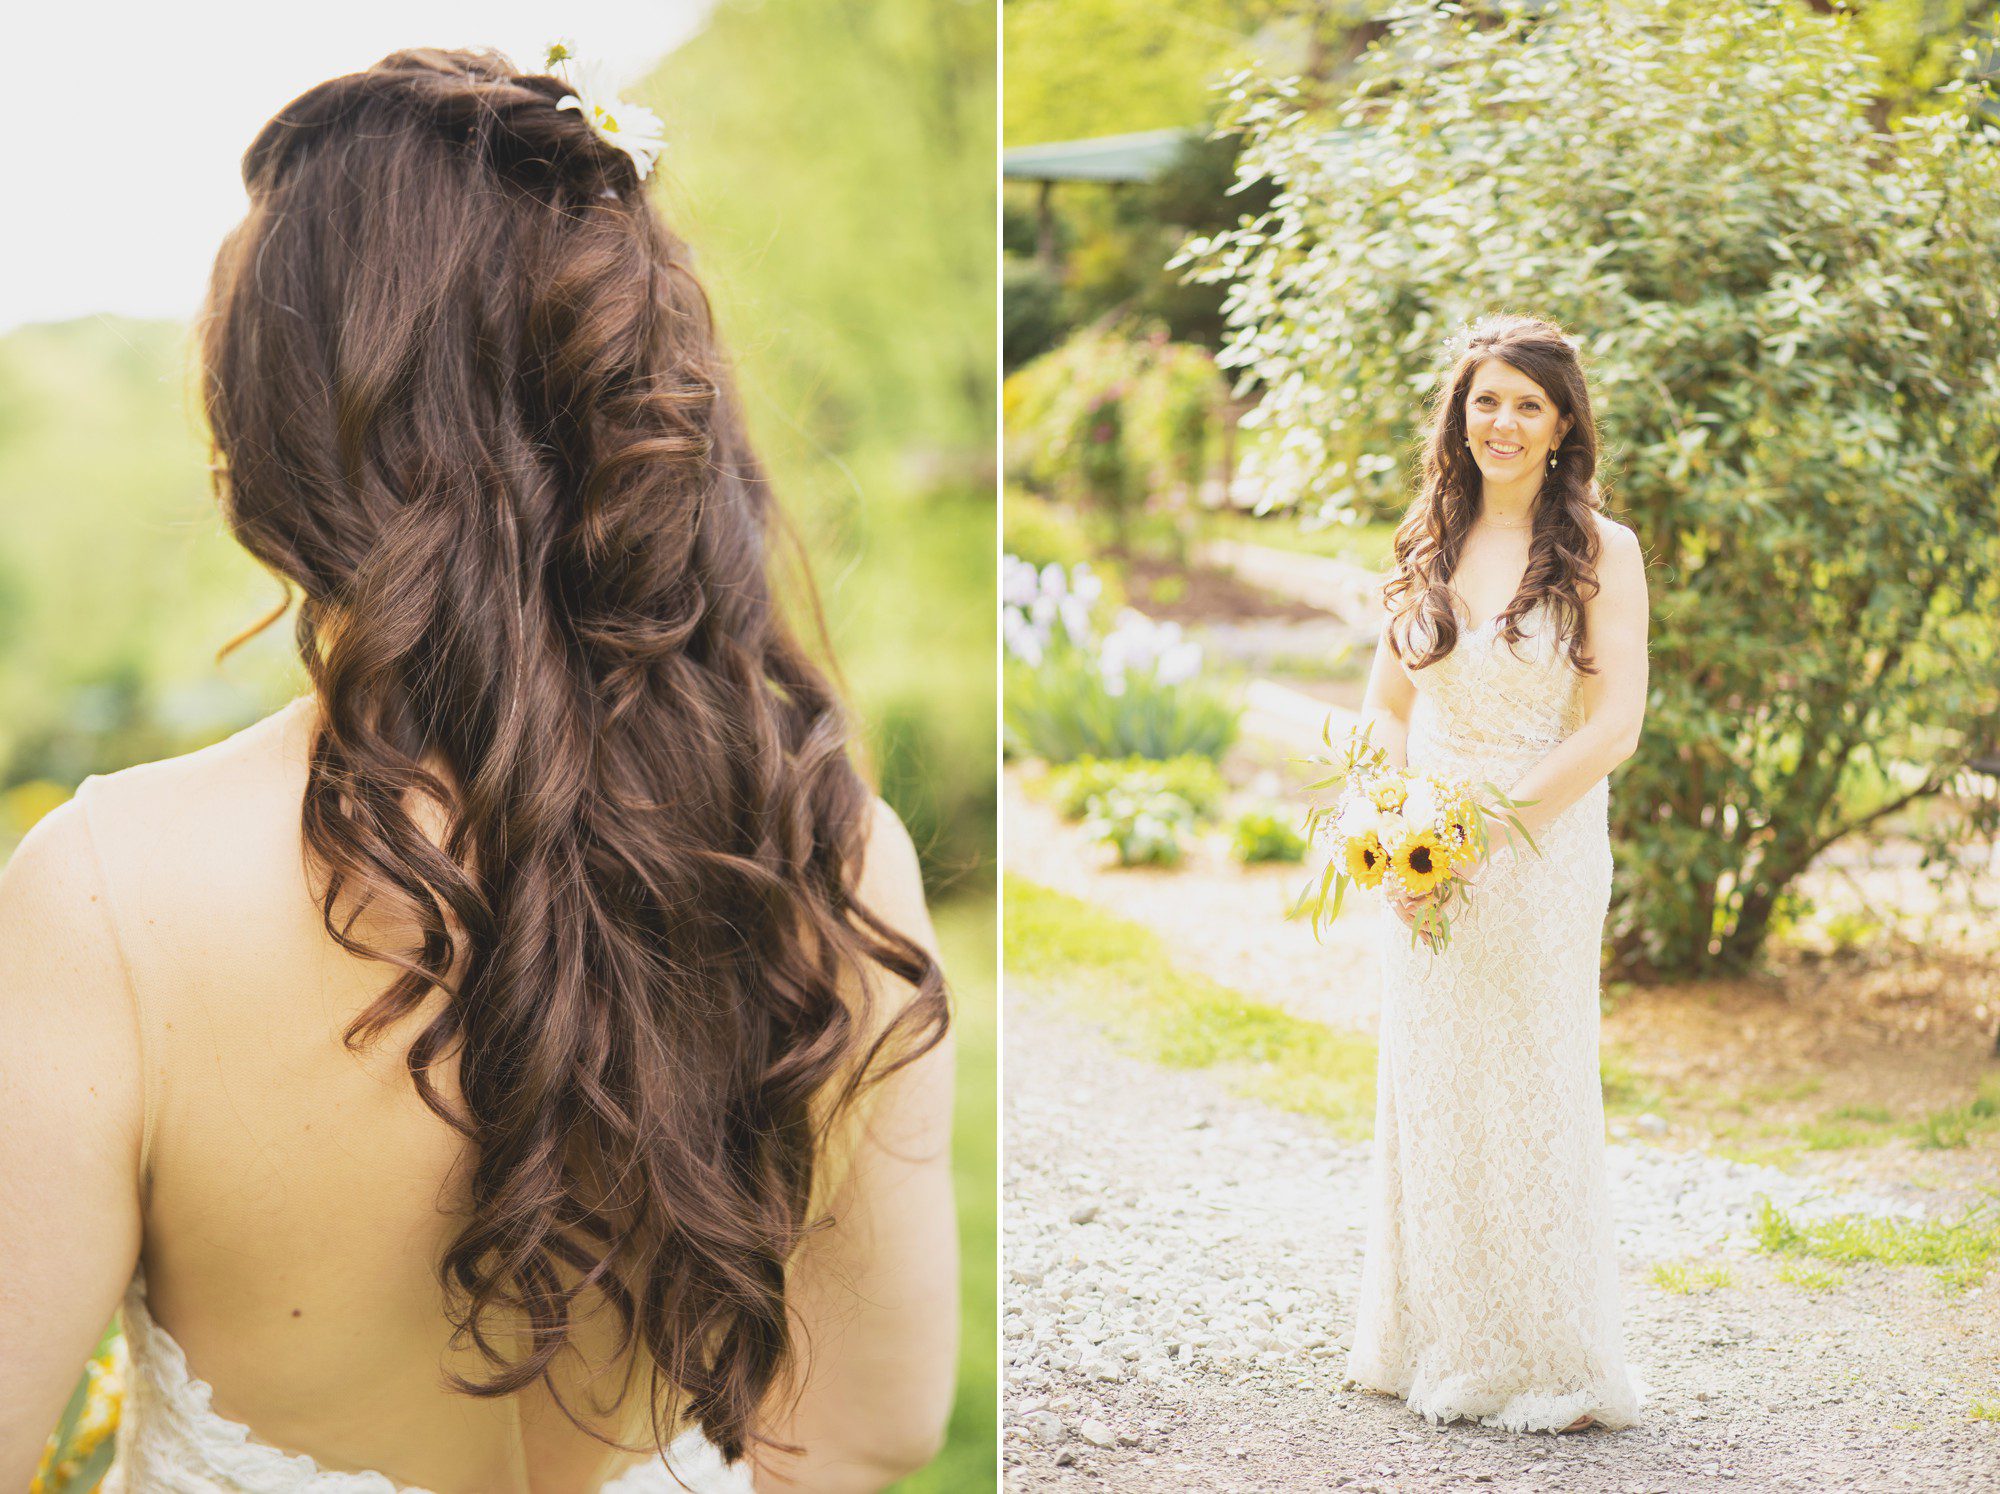 Bridal portraits in garden before elopement wedding ceremony at Butterfly Hollow in Gordonsville, TN. Photos by Krista Lee Photography. 